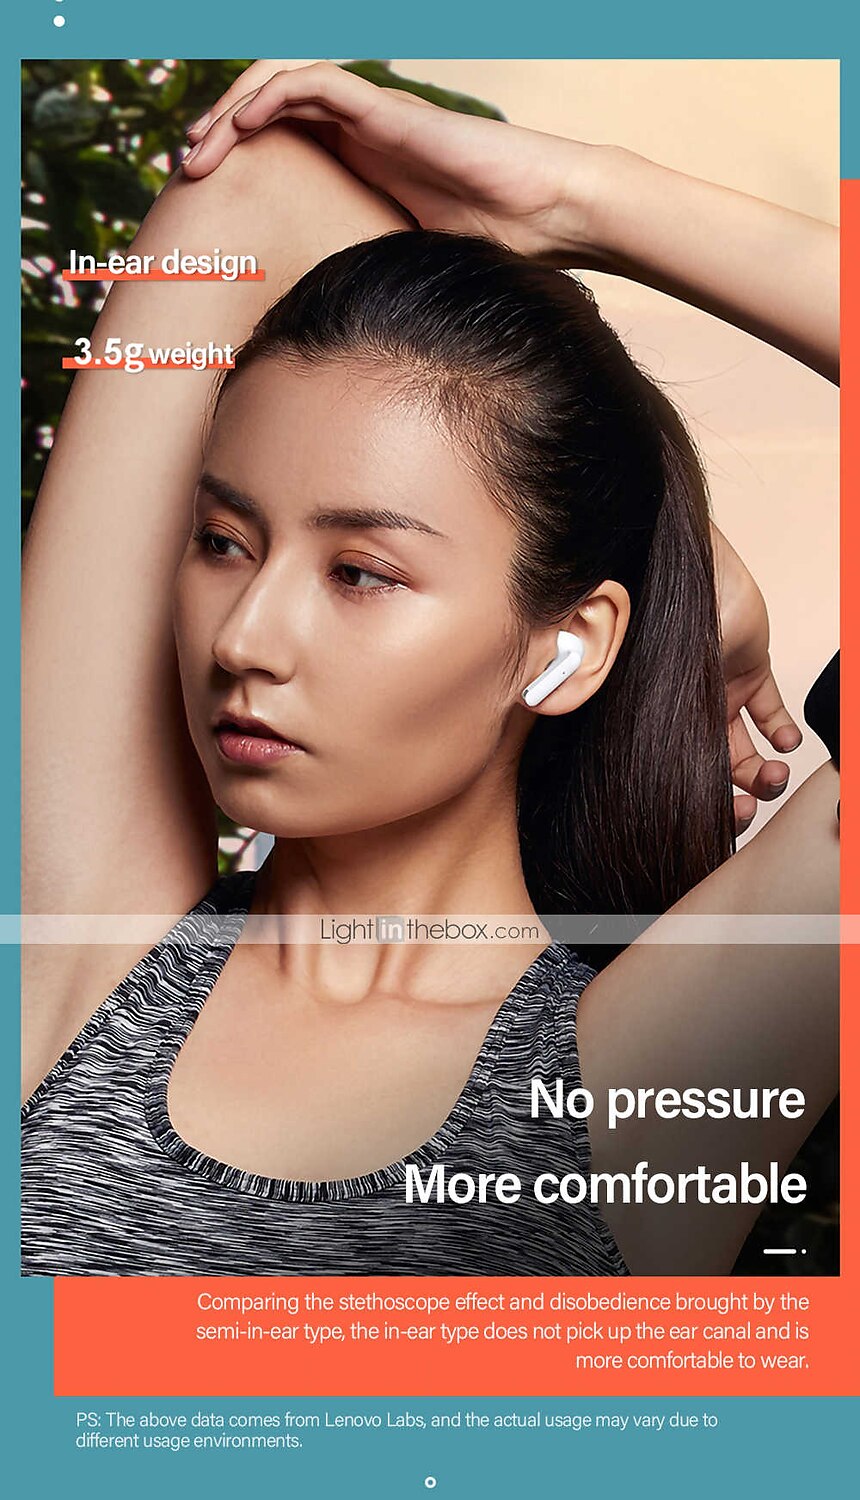 Hheabv1603717799920 Lenovo &Lt;H1&Gt;Lenovo Xt90 Headphones - White&Lt;/H1&Gt; Https://Www.youtube.com/Watch?V=Gid67Ssw6Nk Bt 5.0 Headphones True Wireless Earbuds With Touch Control Hands-Free Stereo Sound Noise Canceling Ip54 Waterproof Dual Host Binaural Hd Call Type-C Interface Headsets With Mic For Gaming Sports Music Compatible With Ios Android Pc &Lt;A Href=&Quot;Https://Lablaab.com/?S=Earbuds&Amp;Post_Type=Product&Amp;Product_Cat=0&Quot;&Gt;More Products&Lt;/A&Gt; &Lt;B&Gt;We Also Provide International Wholesale And Retail Shipping To All Gcc Countries: Saudi Arabia, Qatar, Oman, Kuwait, Bahrain. &Lt;/B&Gt; &Lt;Pre&Gt;&Lt;/Pre&Gt; Lenovo Lenovo Xt90 Headphones - White